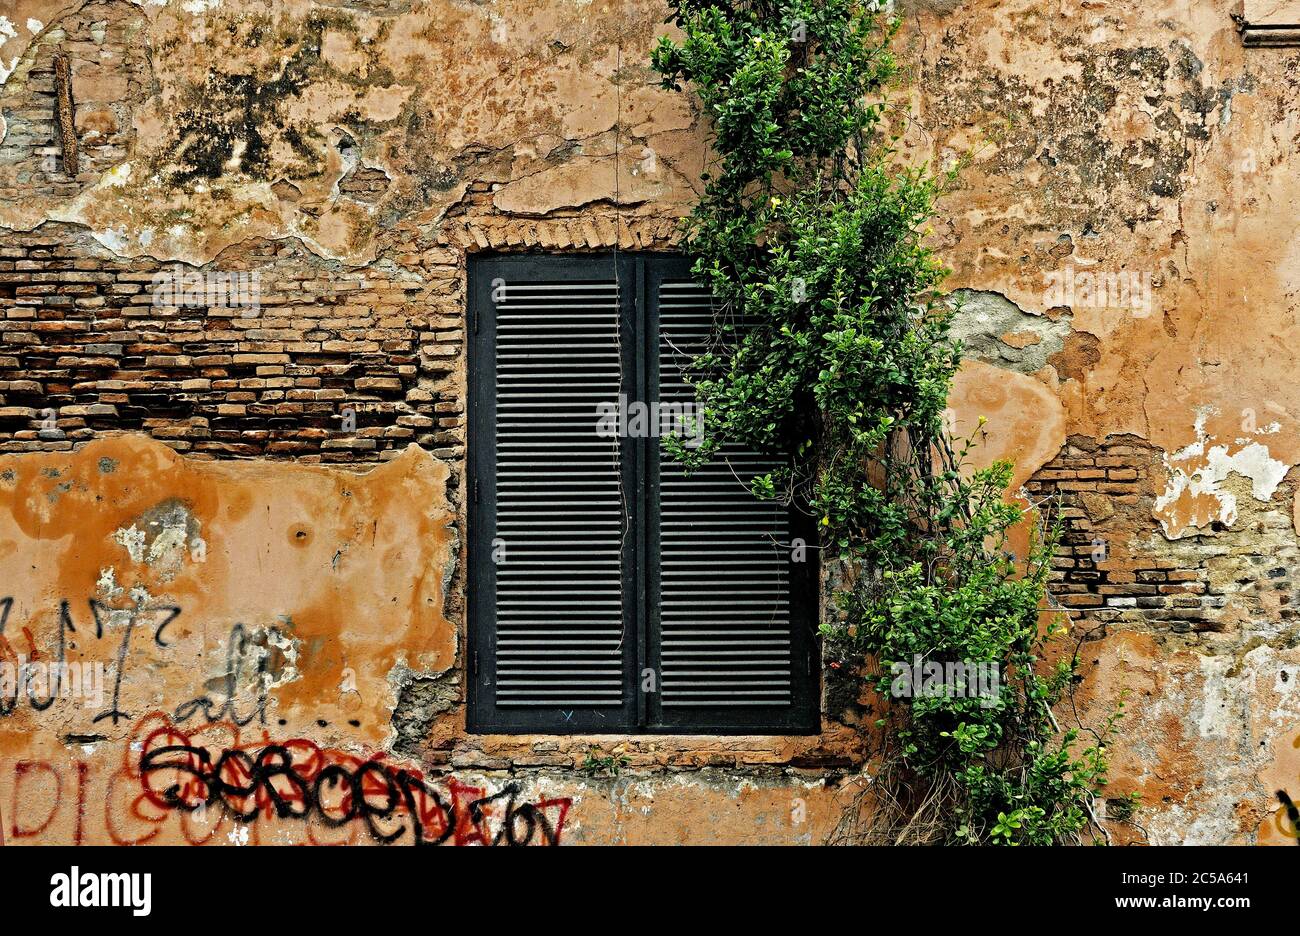 jakarta, dki jakarta/indonesia - may 19, 2010: dilapidated facade and window of an old building in kota tua Stock Photo